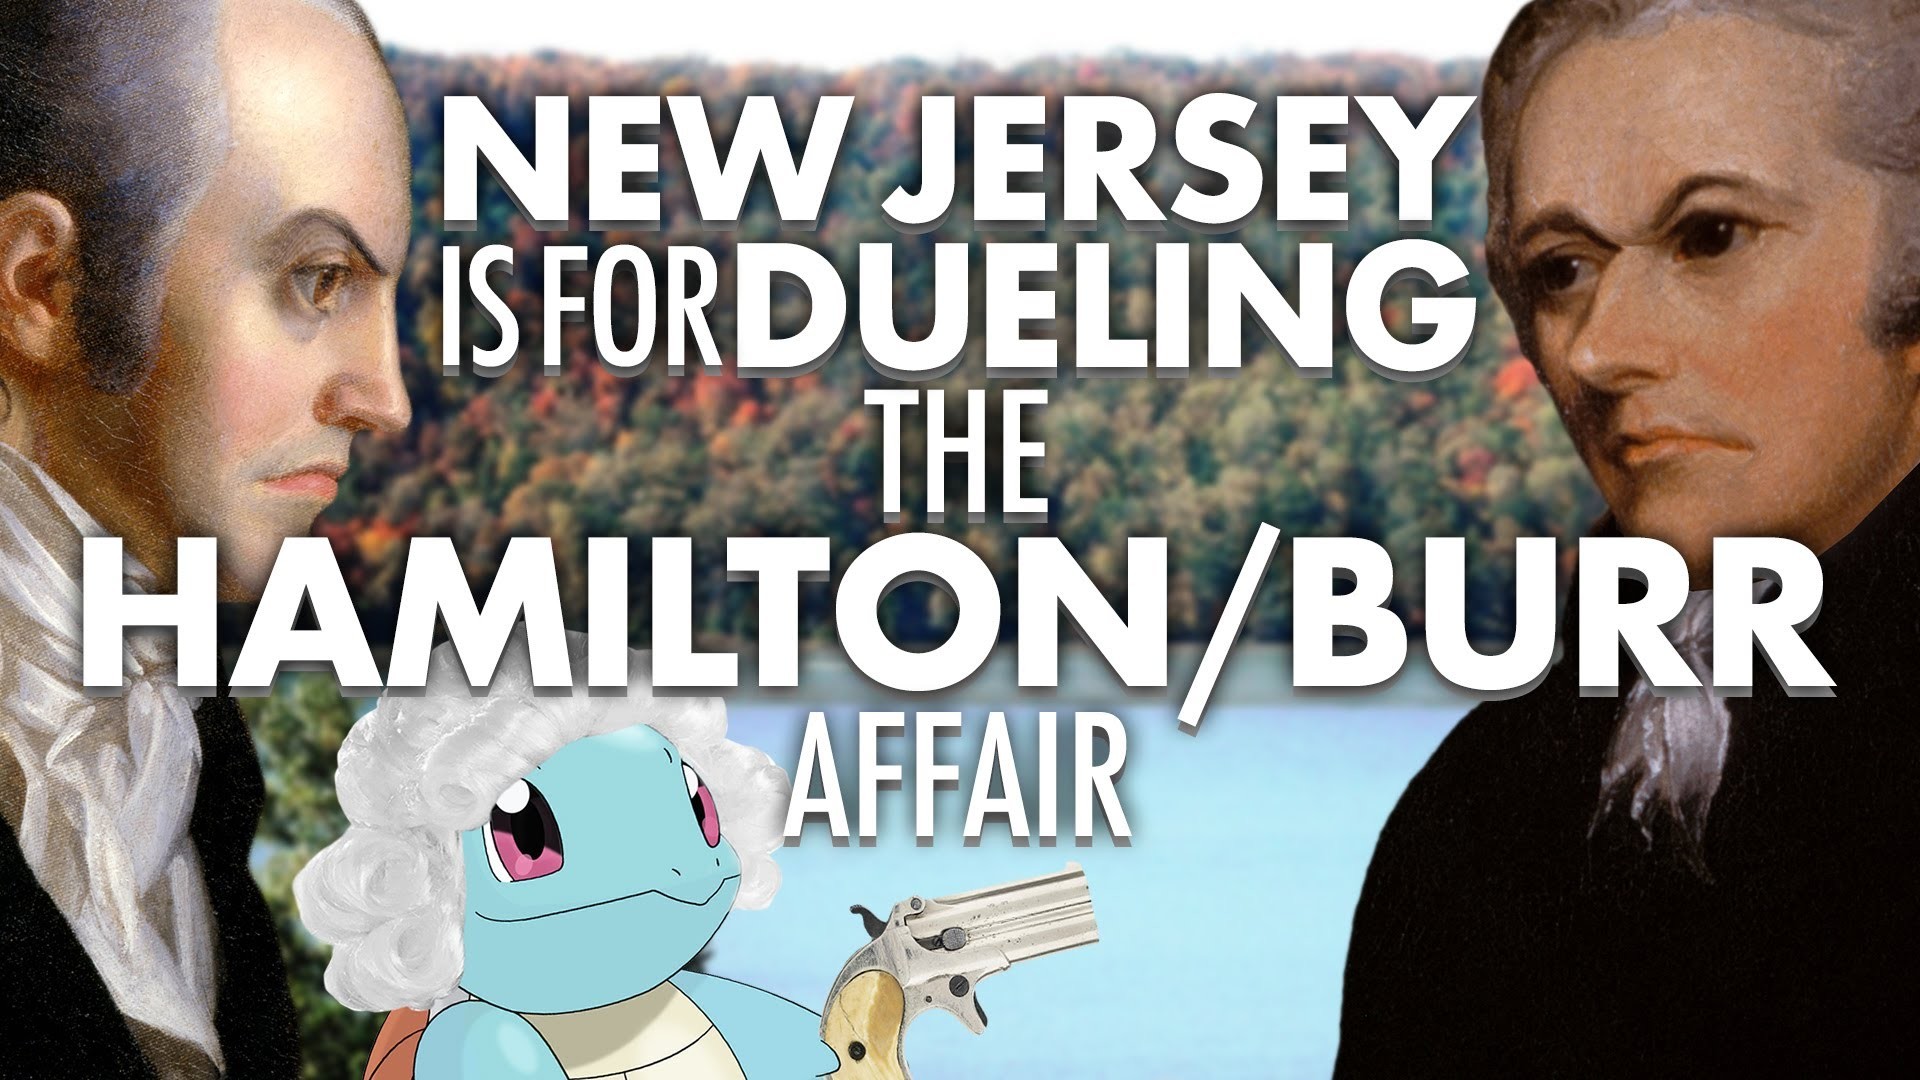 1920x1080 Alexander Hamilton VS Aaron Burr: New Jersey is for Dueling | Laughing  Historically - YouTube